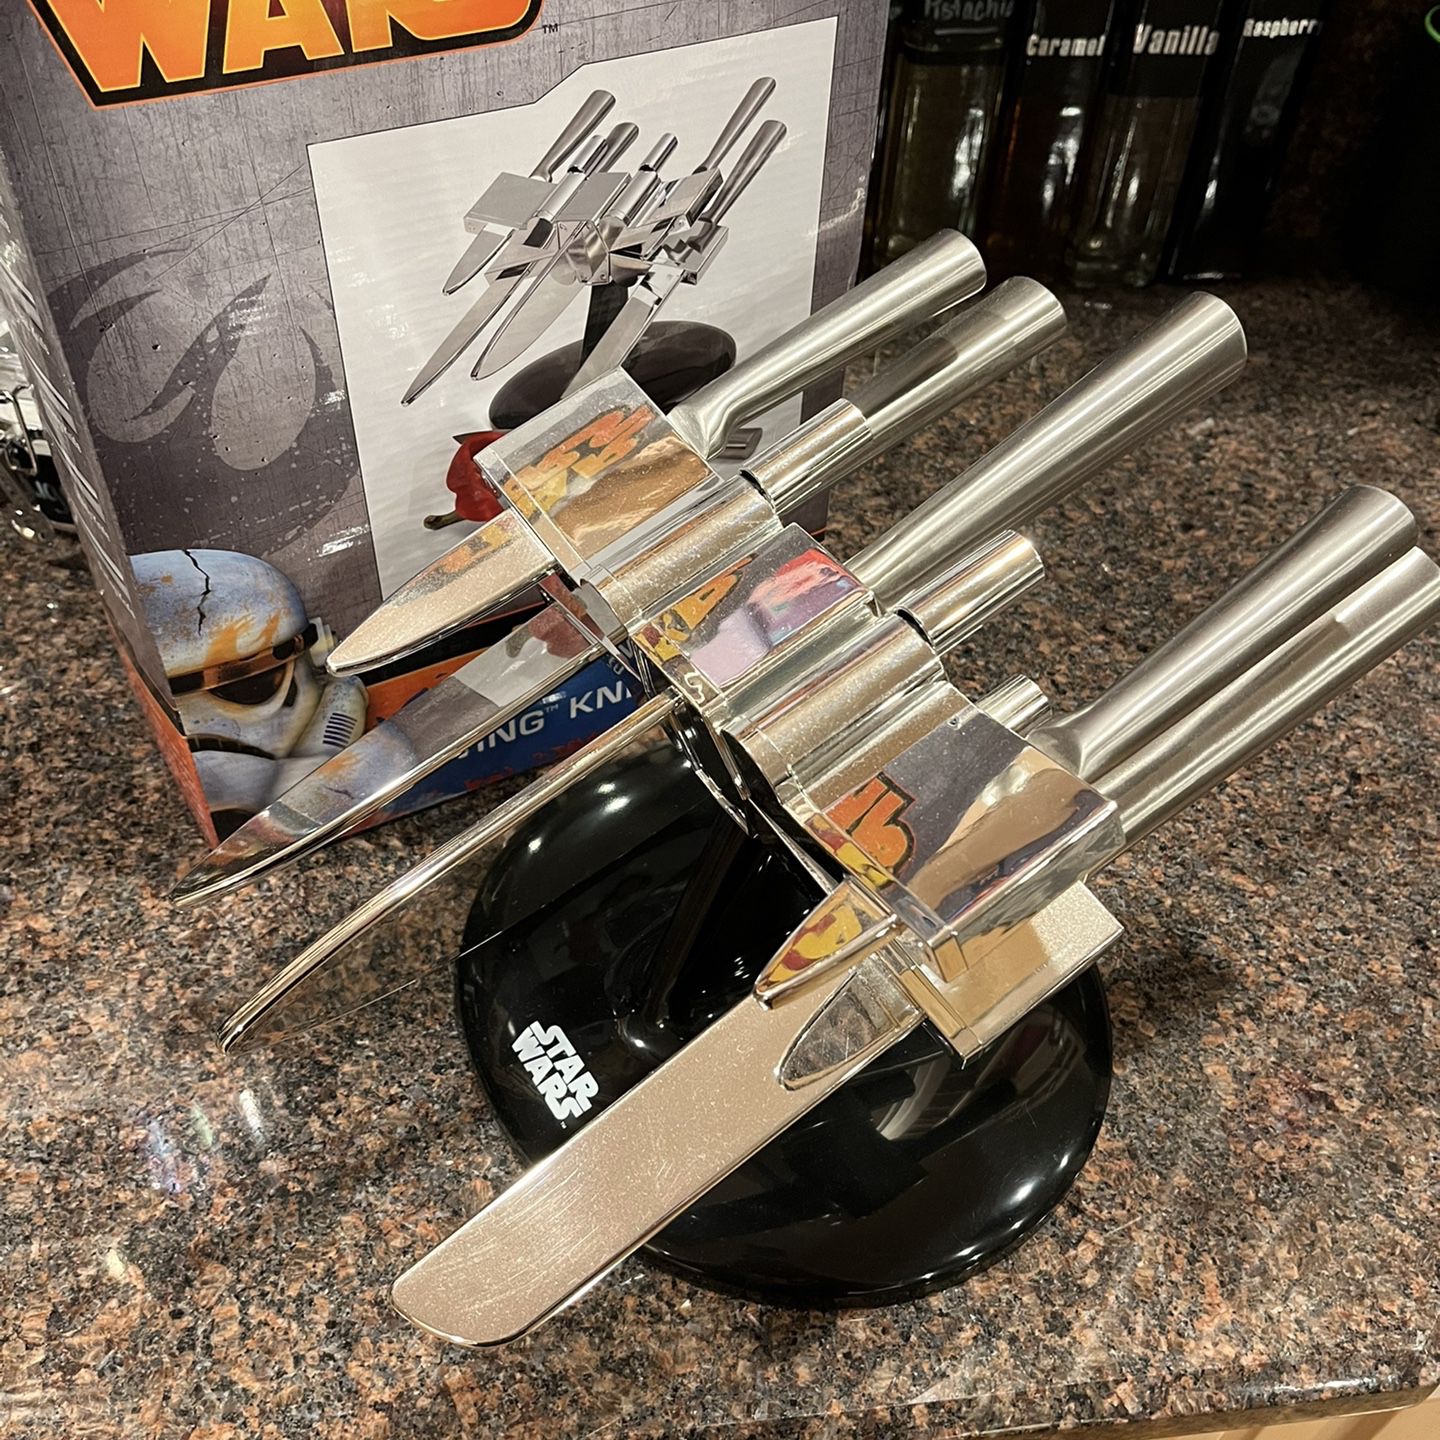 Star Wars X-Wing Knife Block Kitchen Knife Set - collectibles - by owner -  sale - craigslist